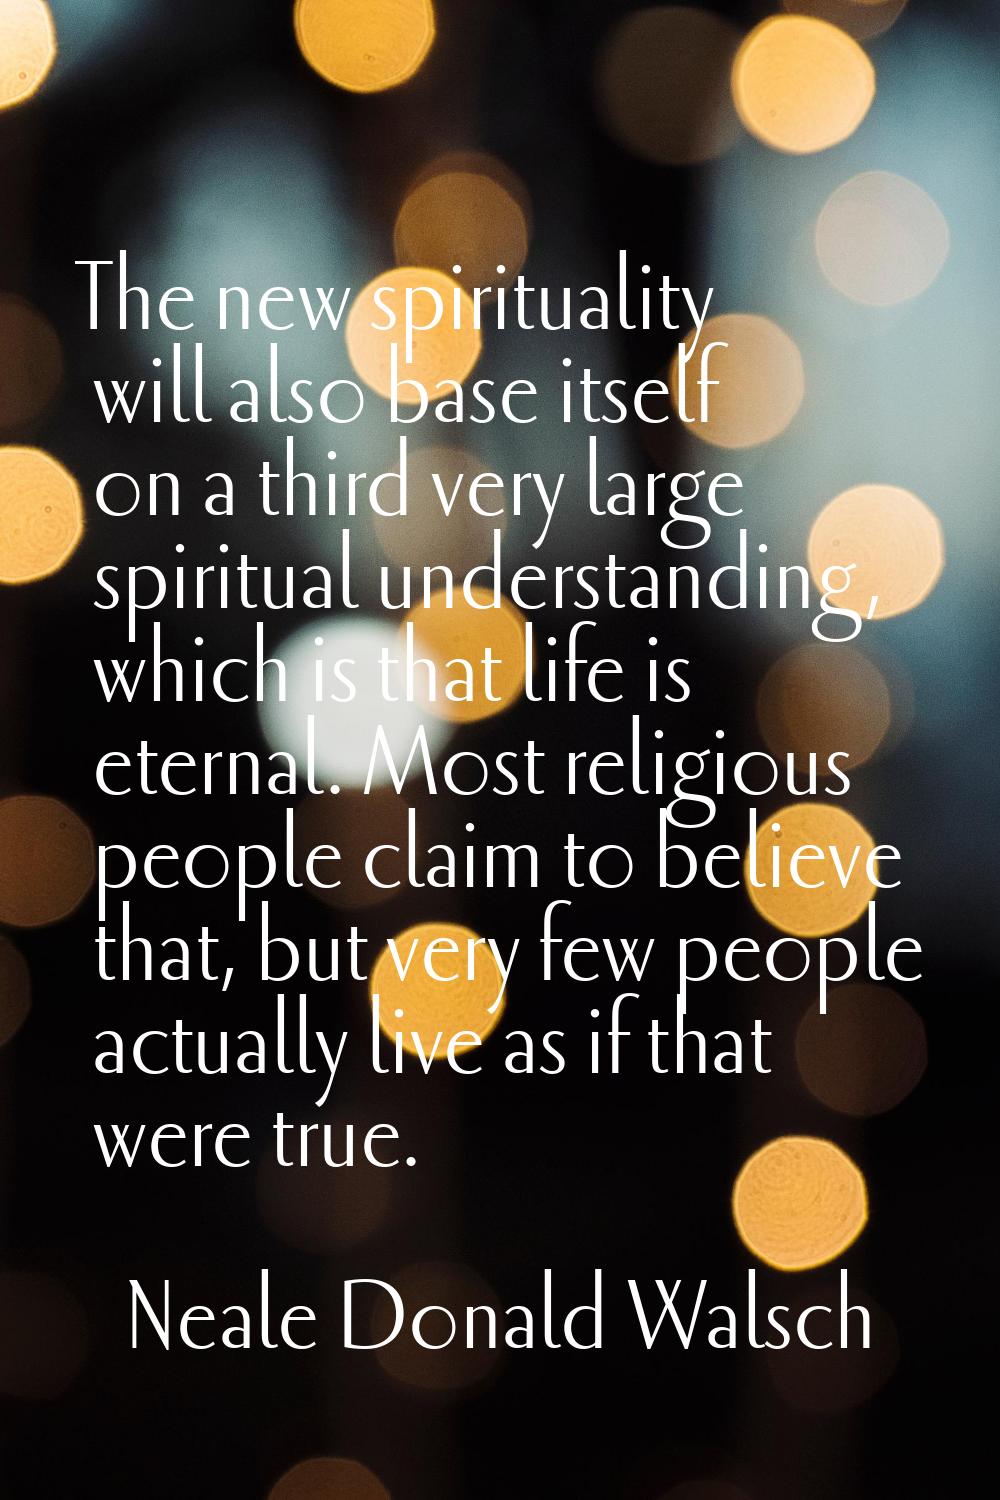 The new spirituality will also base itself on a third very large spiritual understanding, which is 